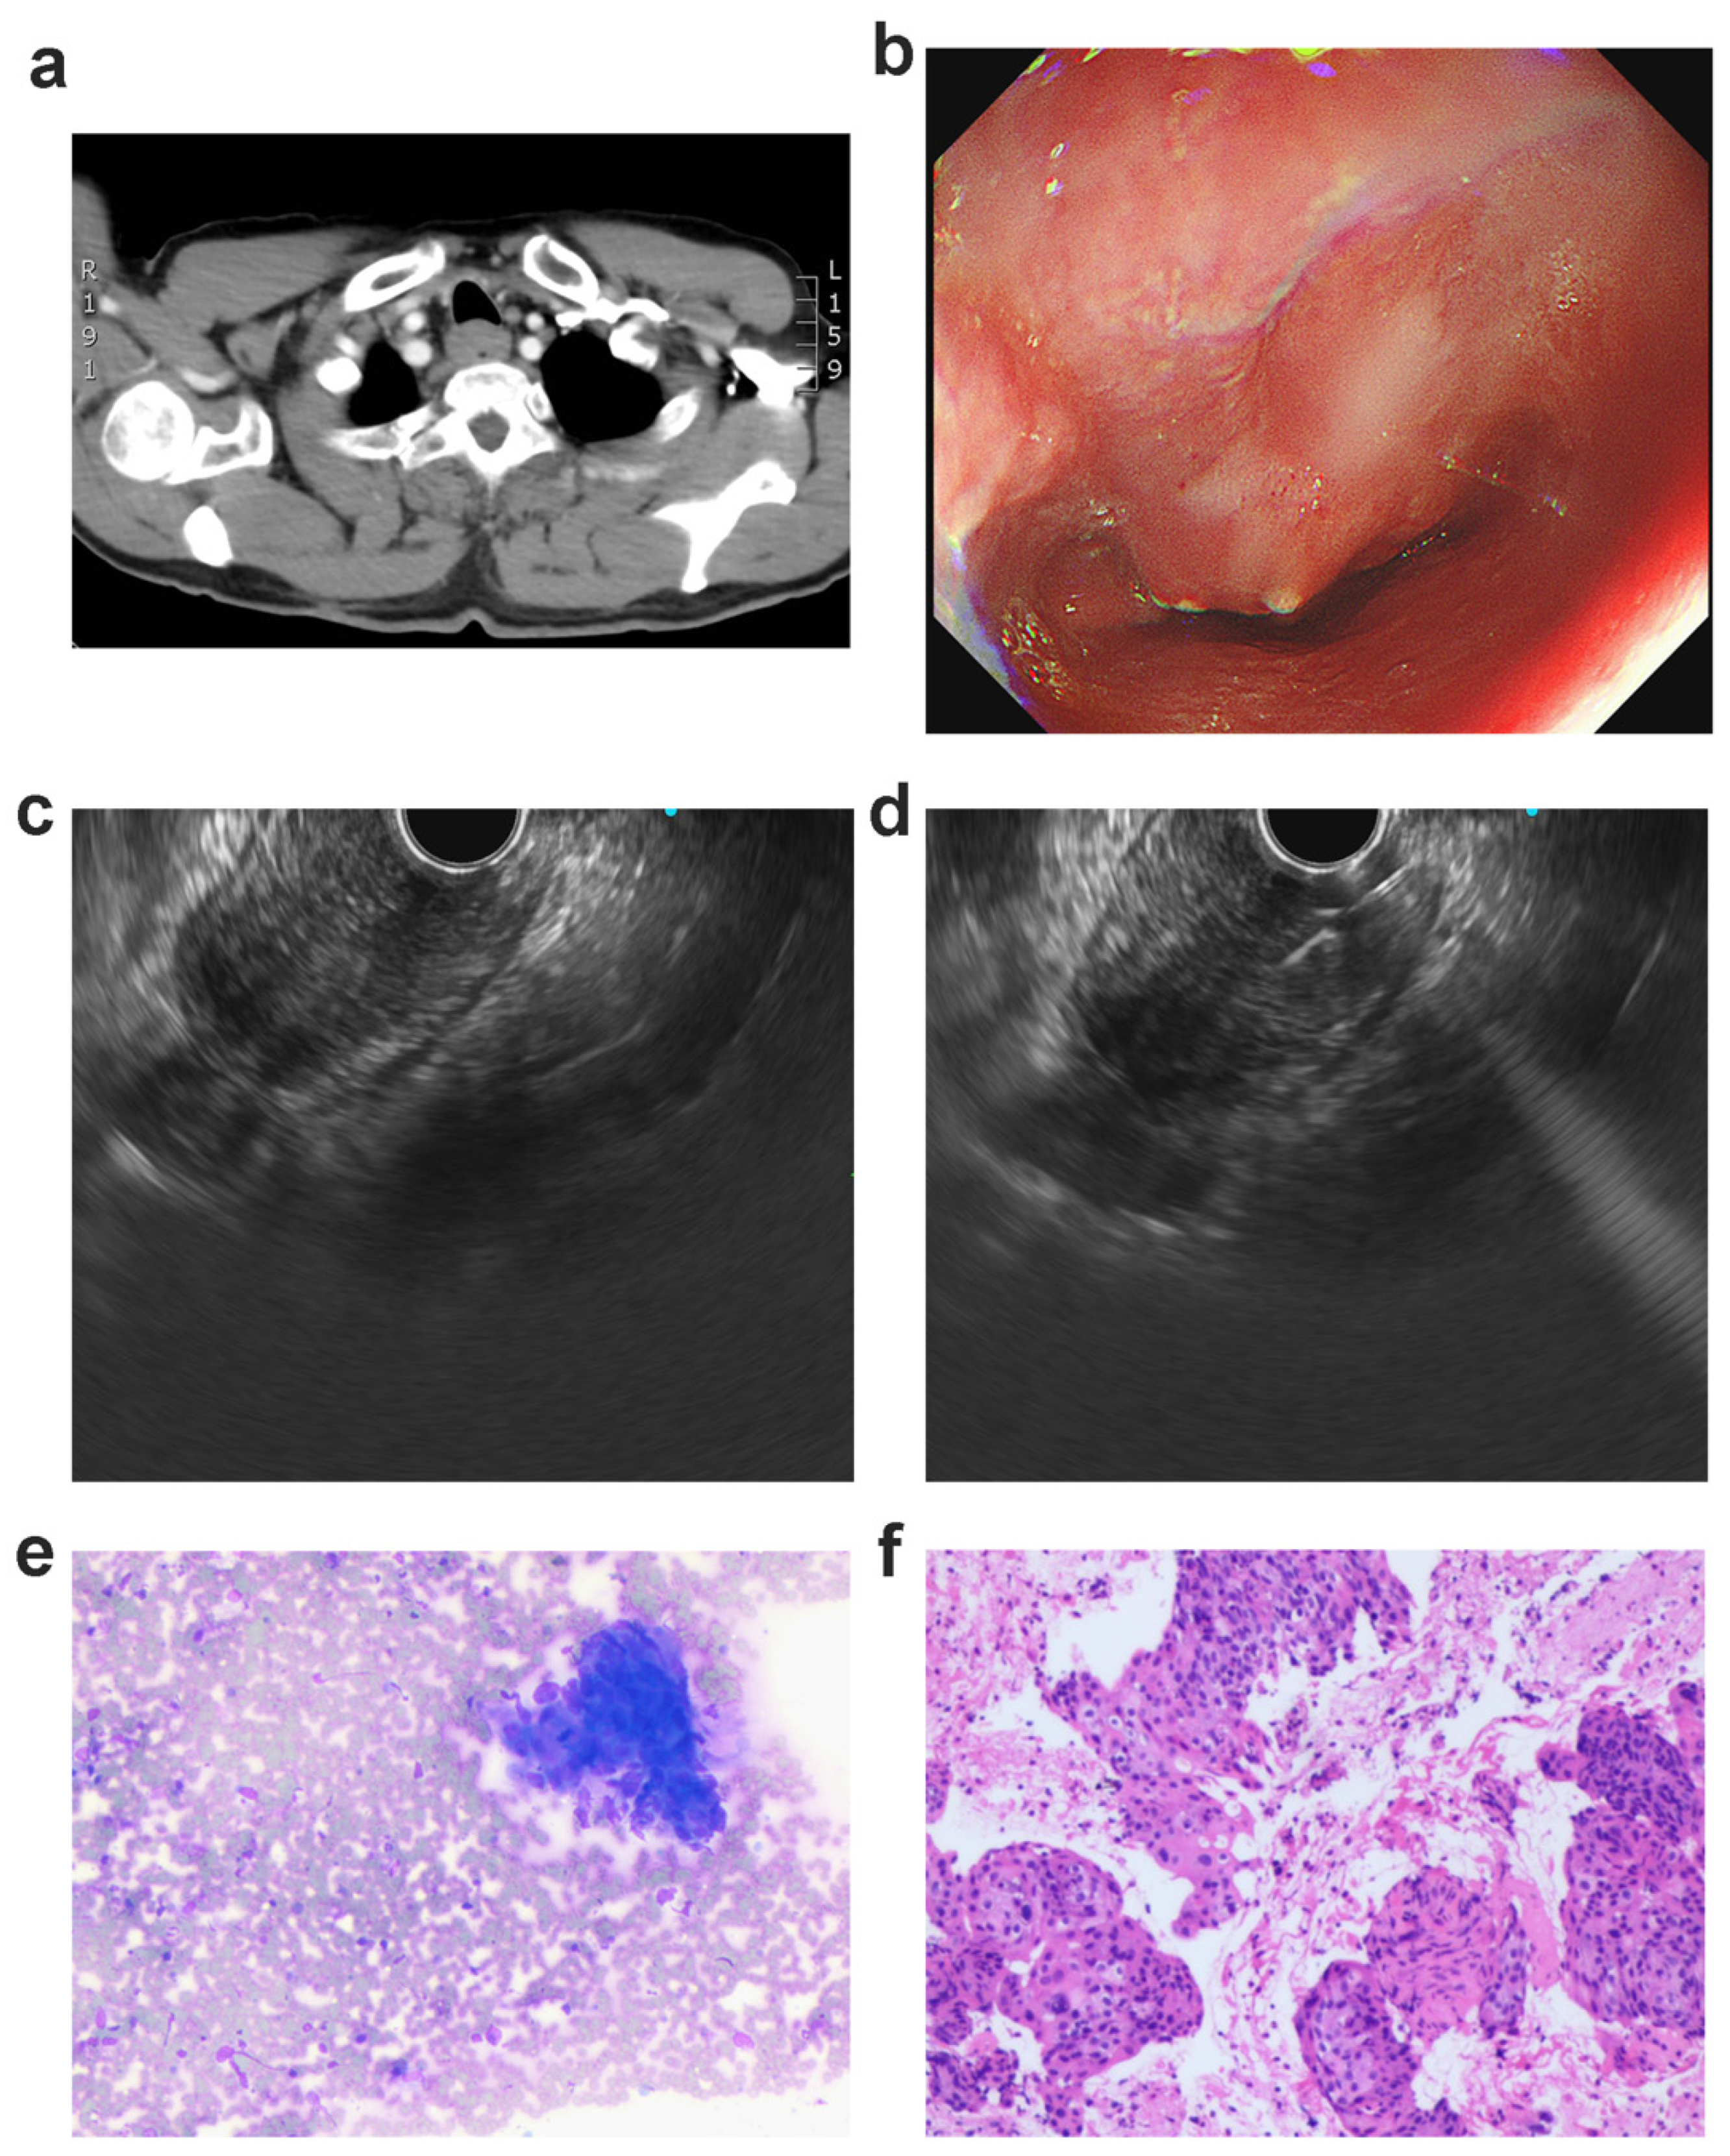 JCM | Free Full-Text | Role of Endoscopic Ultrasound-Guided Fine Needle  Aspiration (EUS-FNA) in the Diagnosis of Suspicious Malignant Esophageal  Strictures